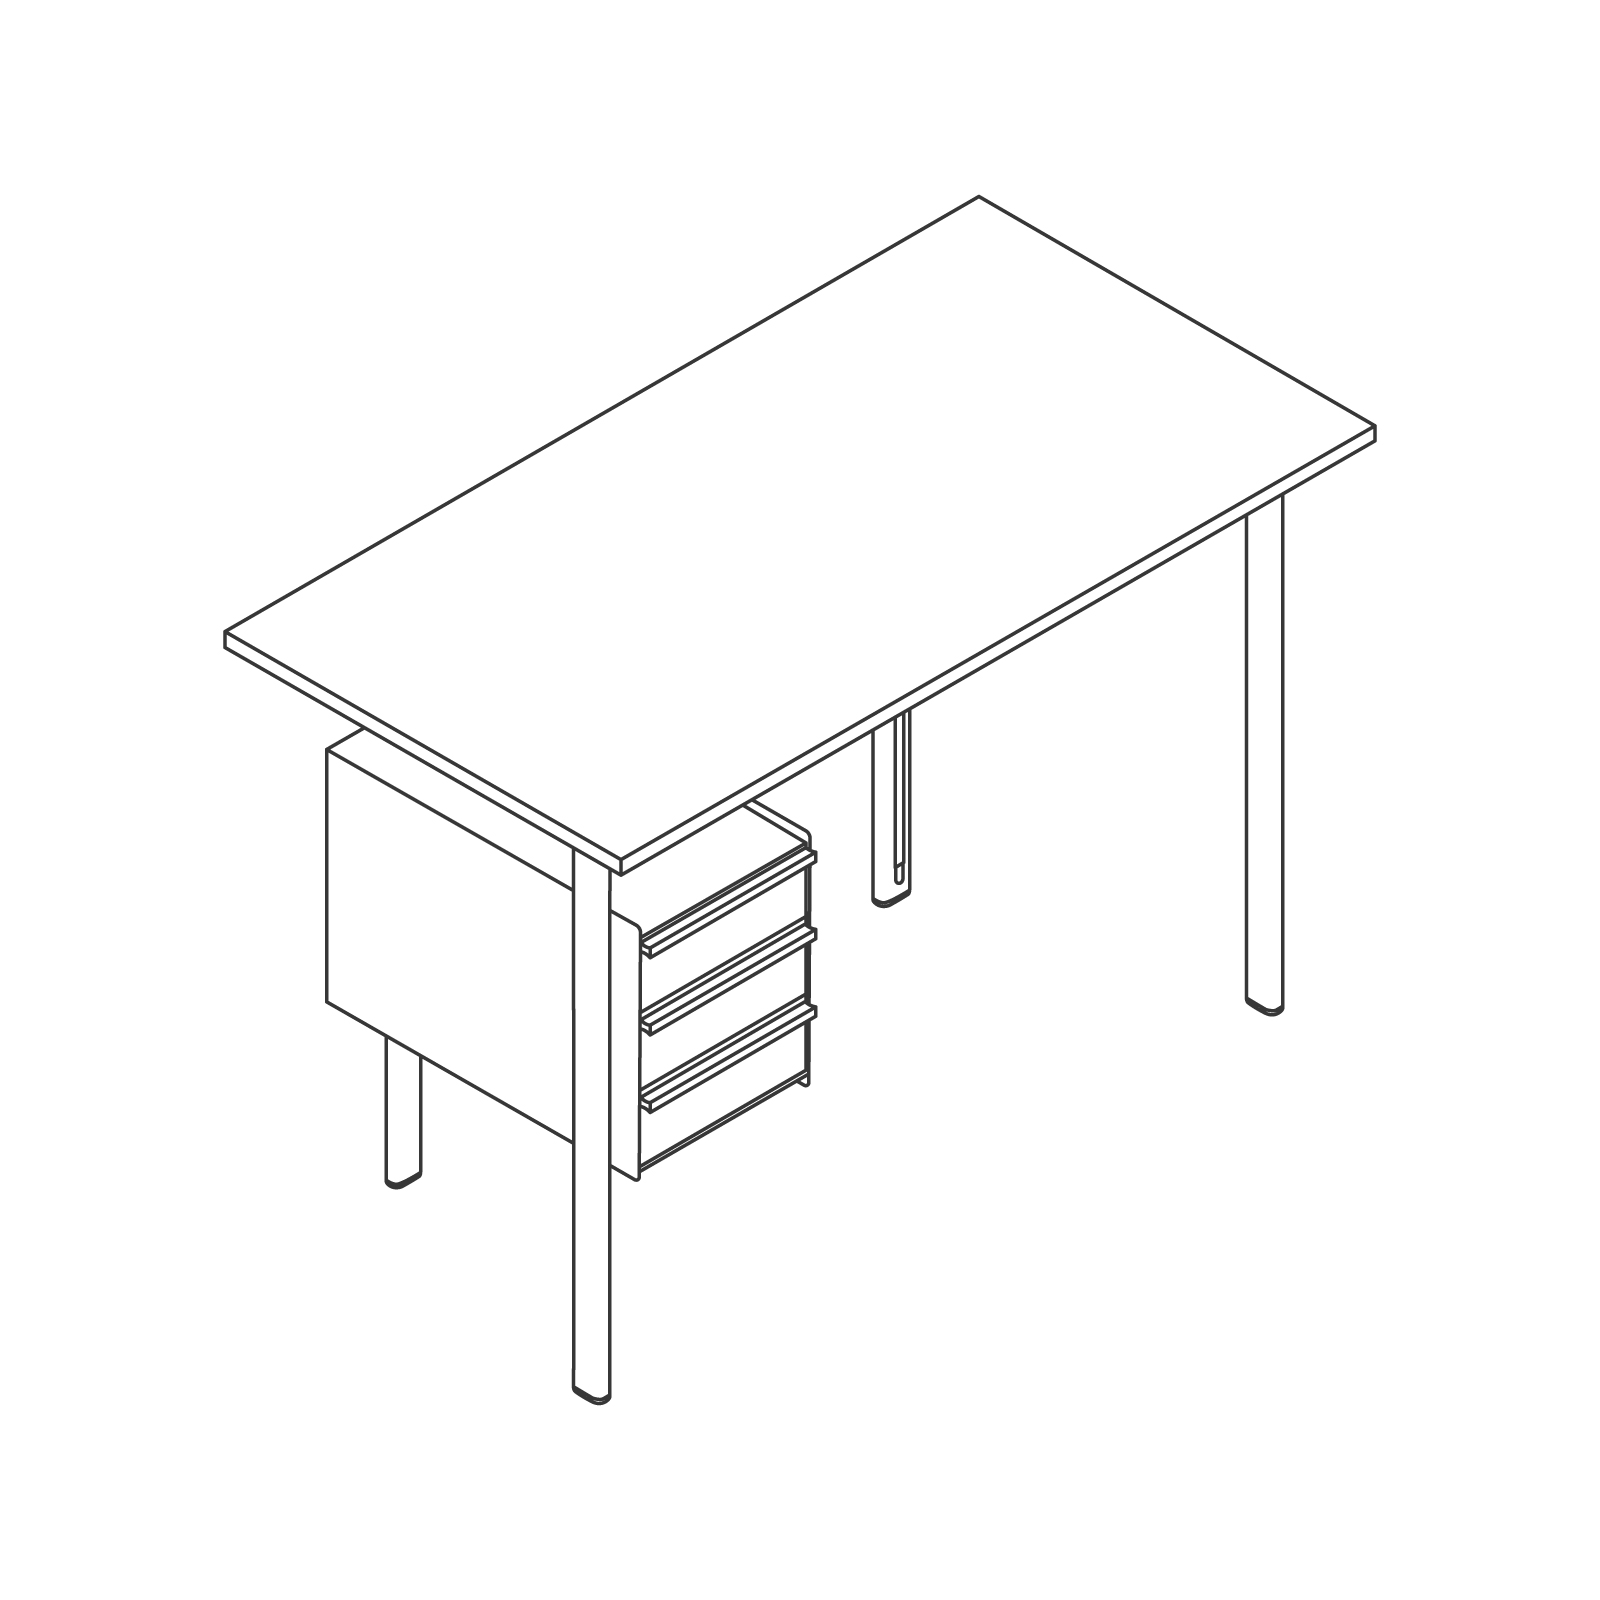 A line drawing - Mode Desk–With Storage